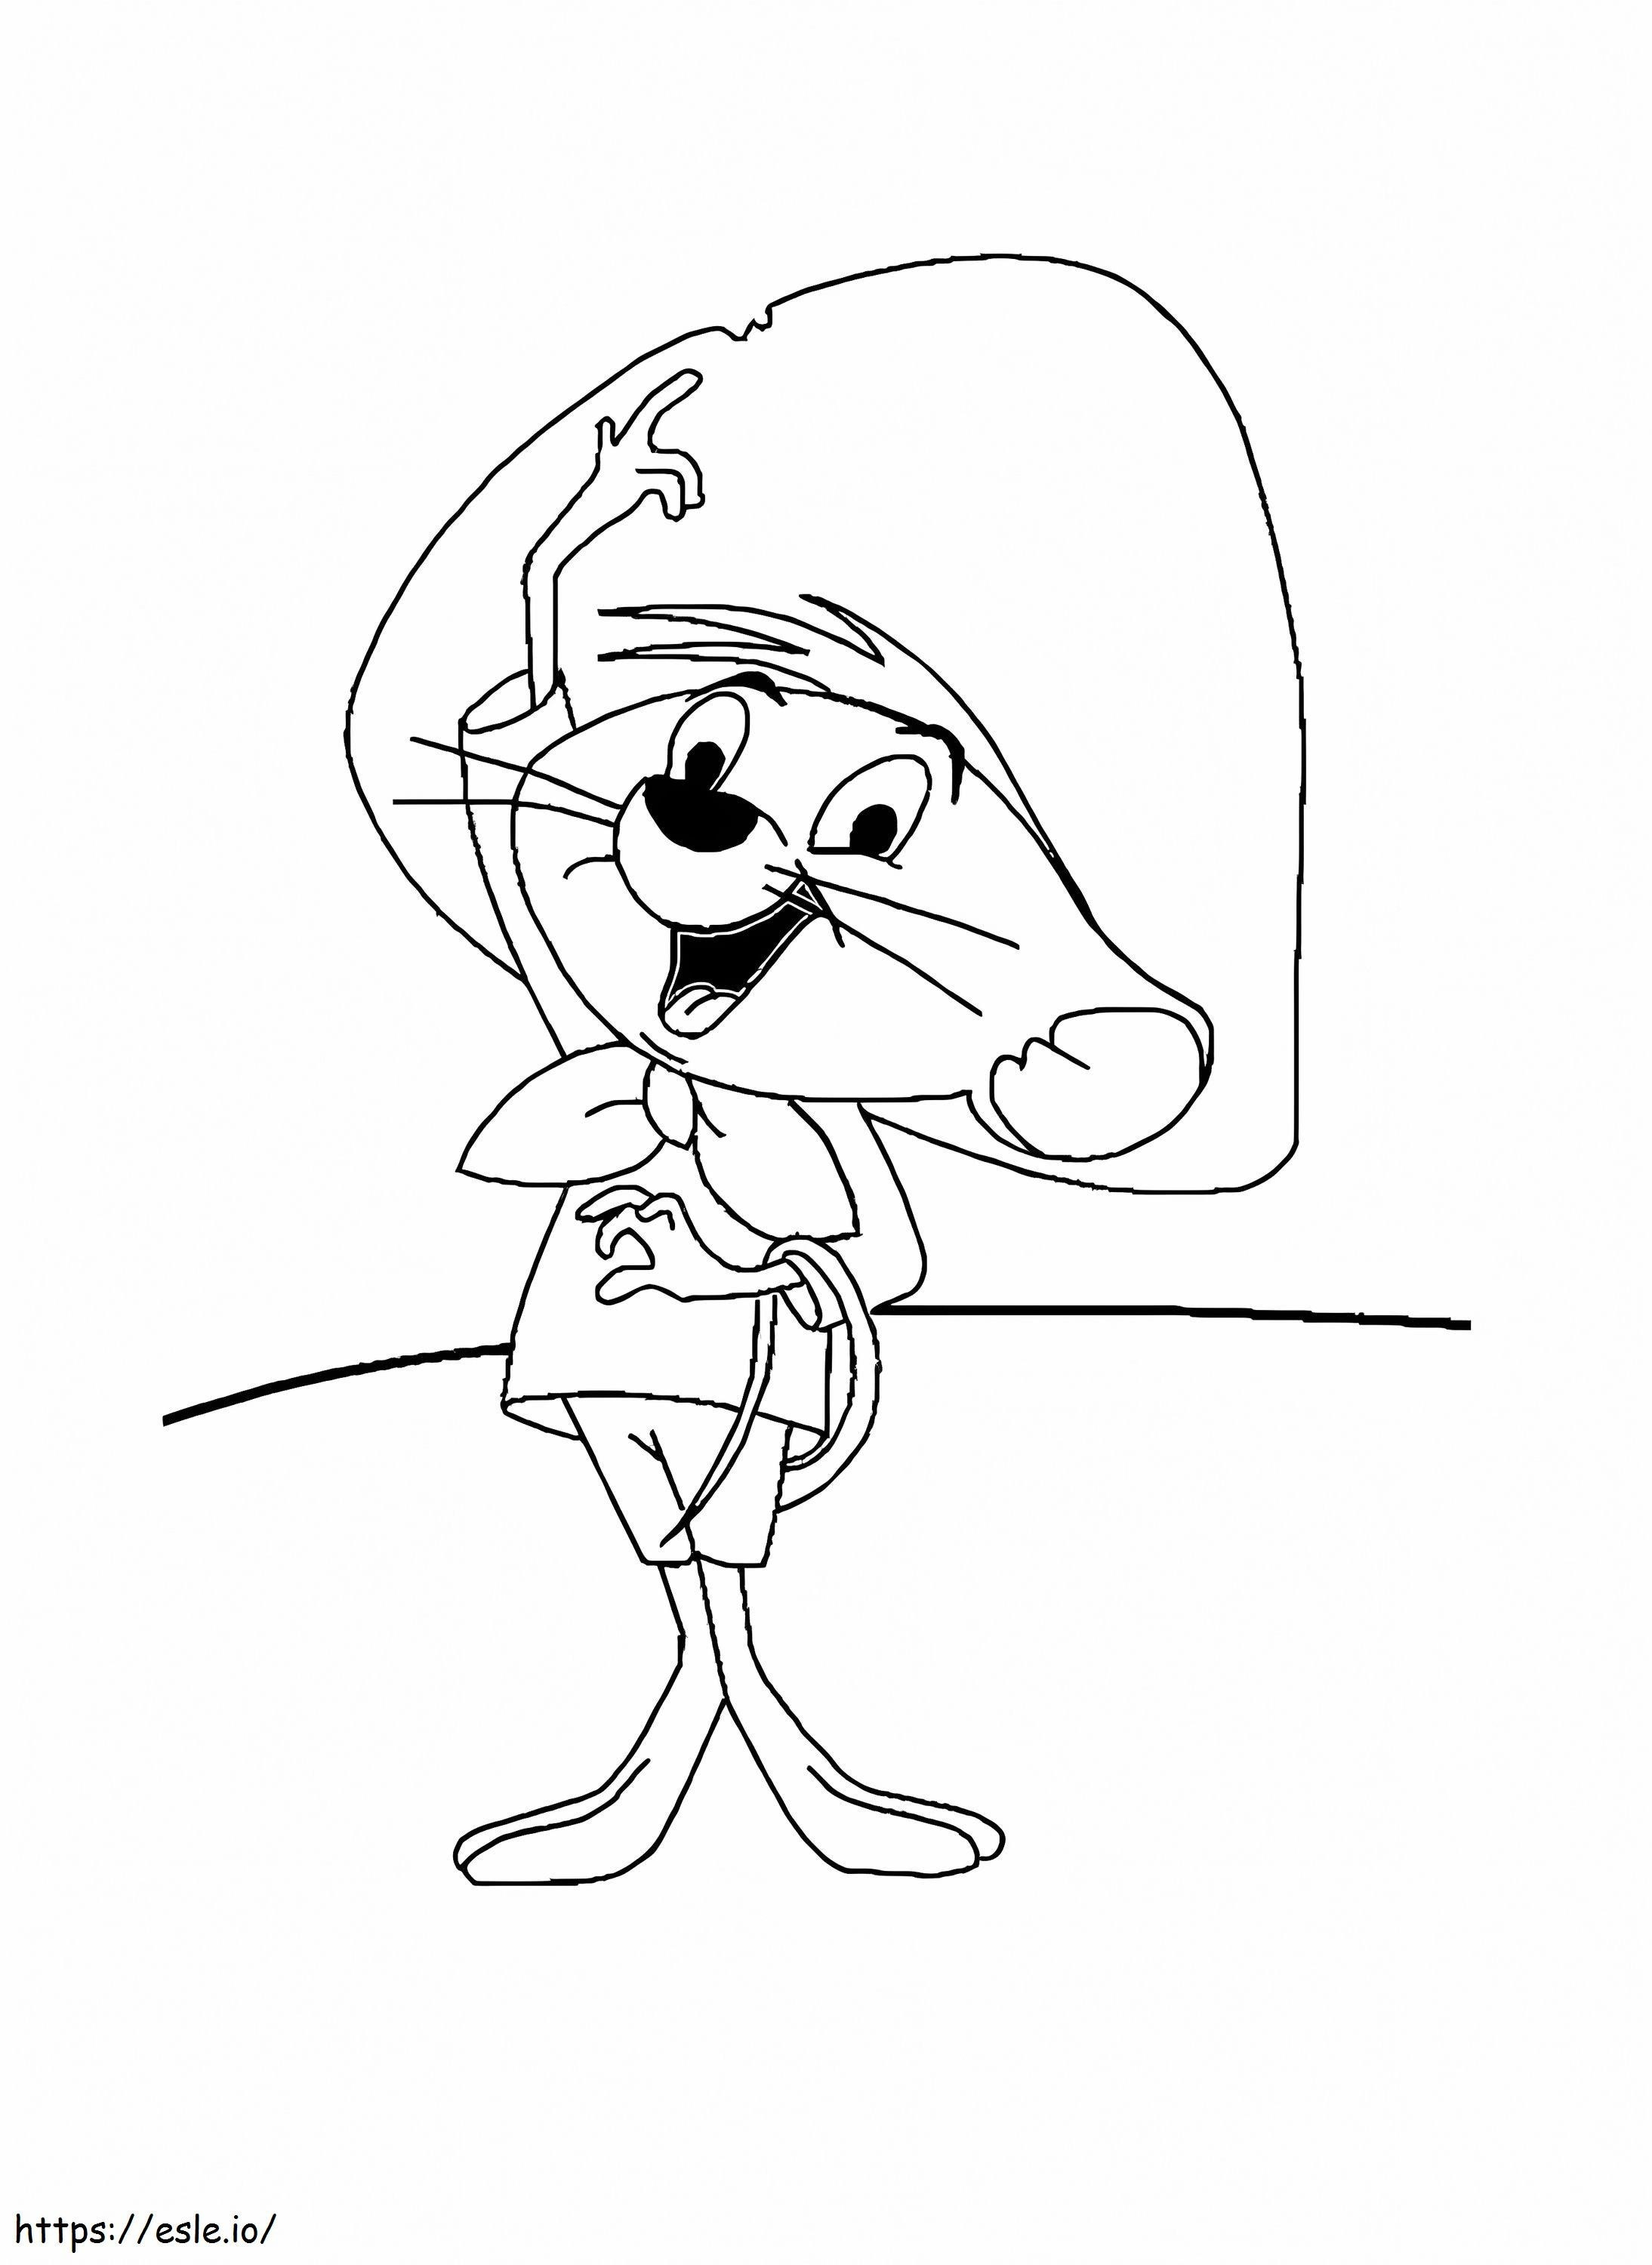 Print Speedy Gonzales coloring page